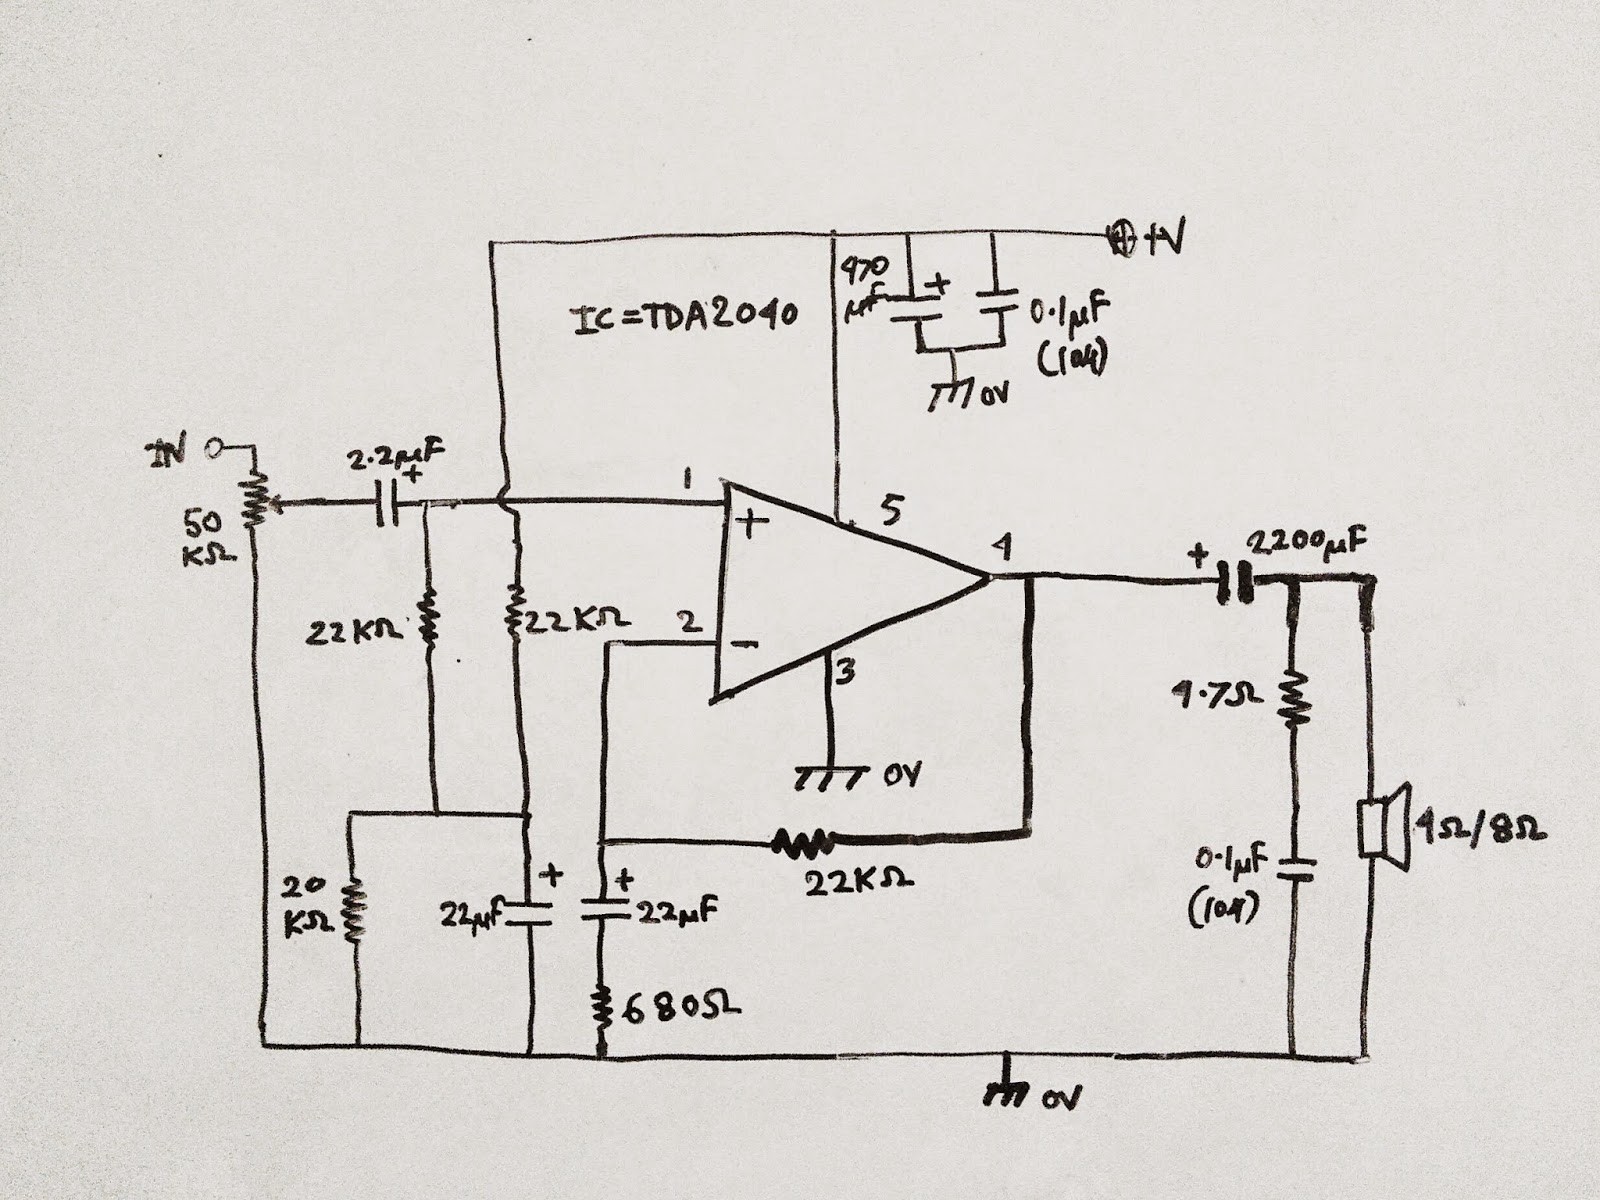 Another Amplifier Using TDA2040